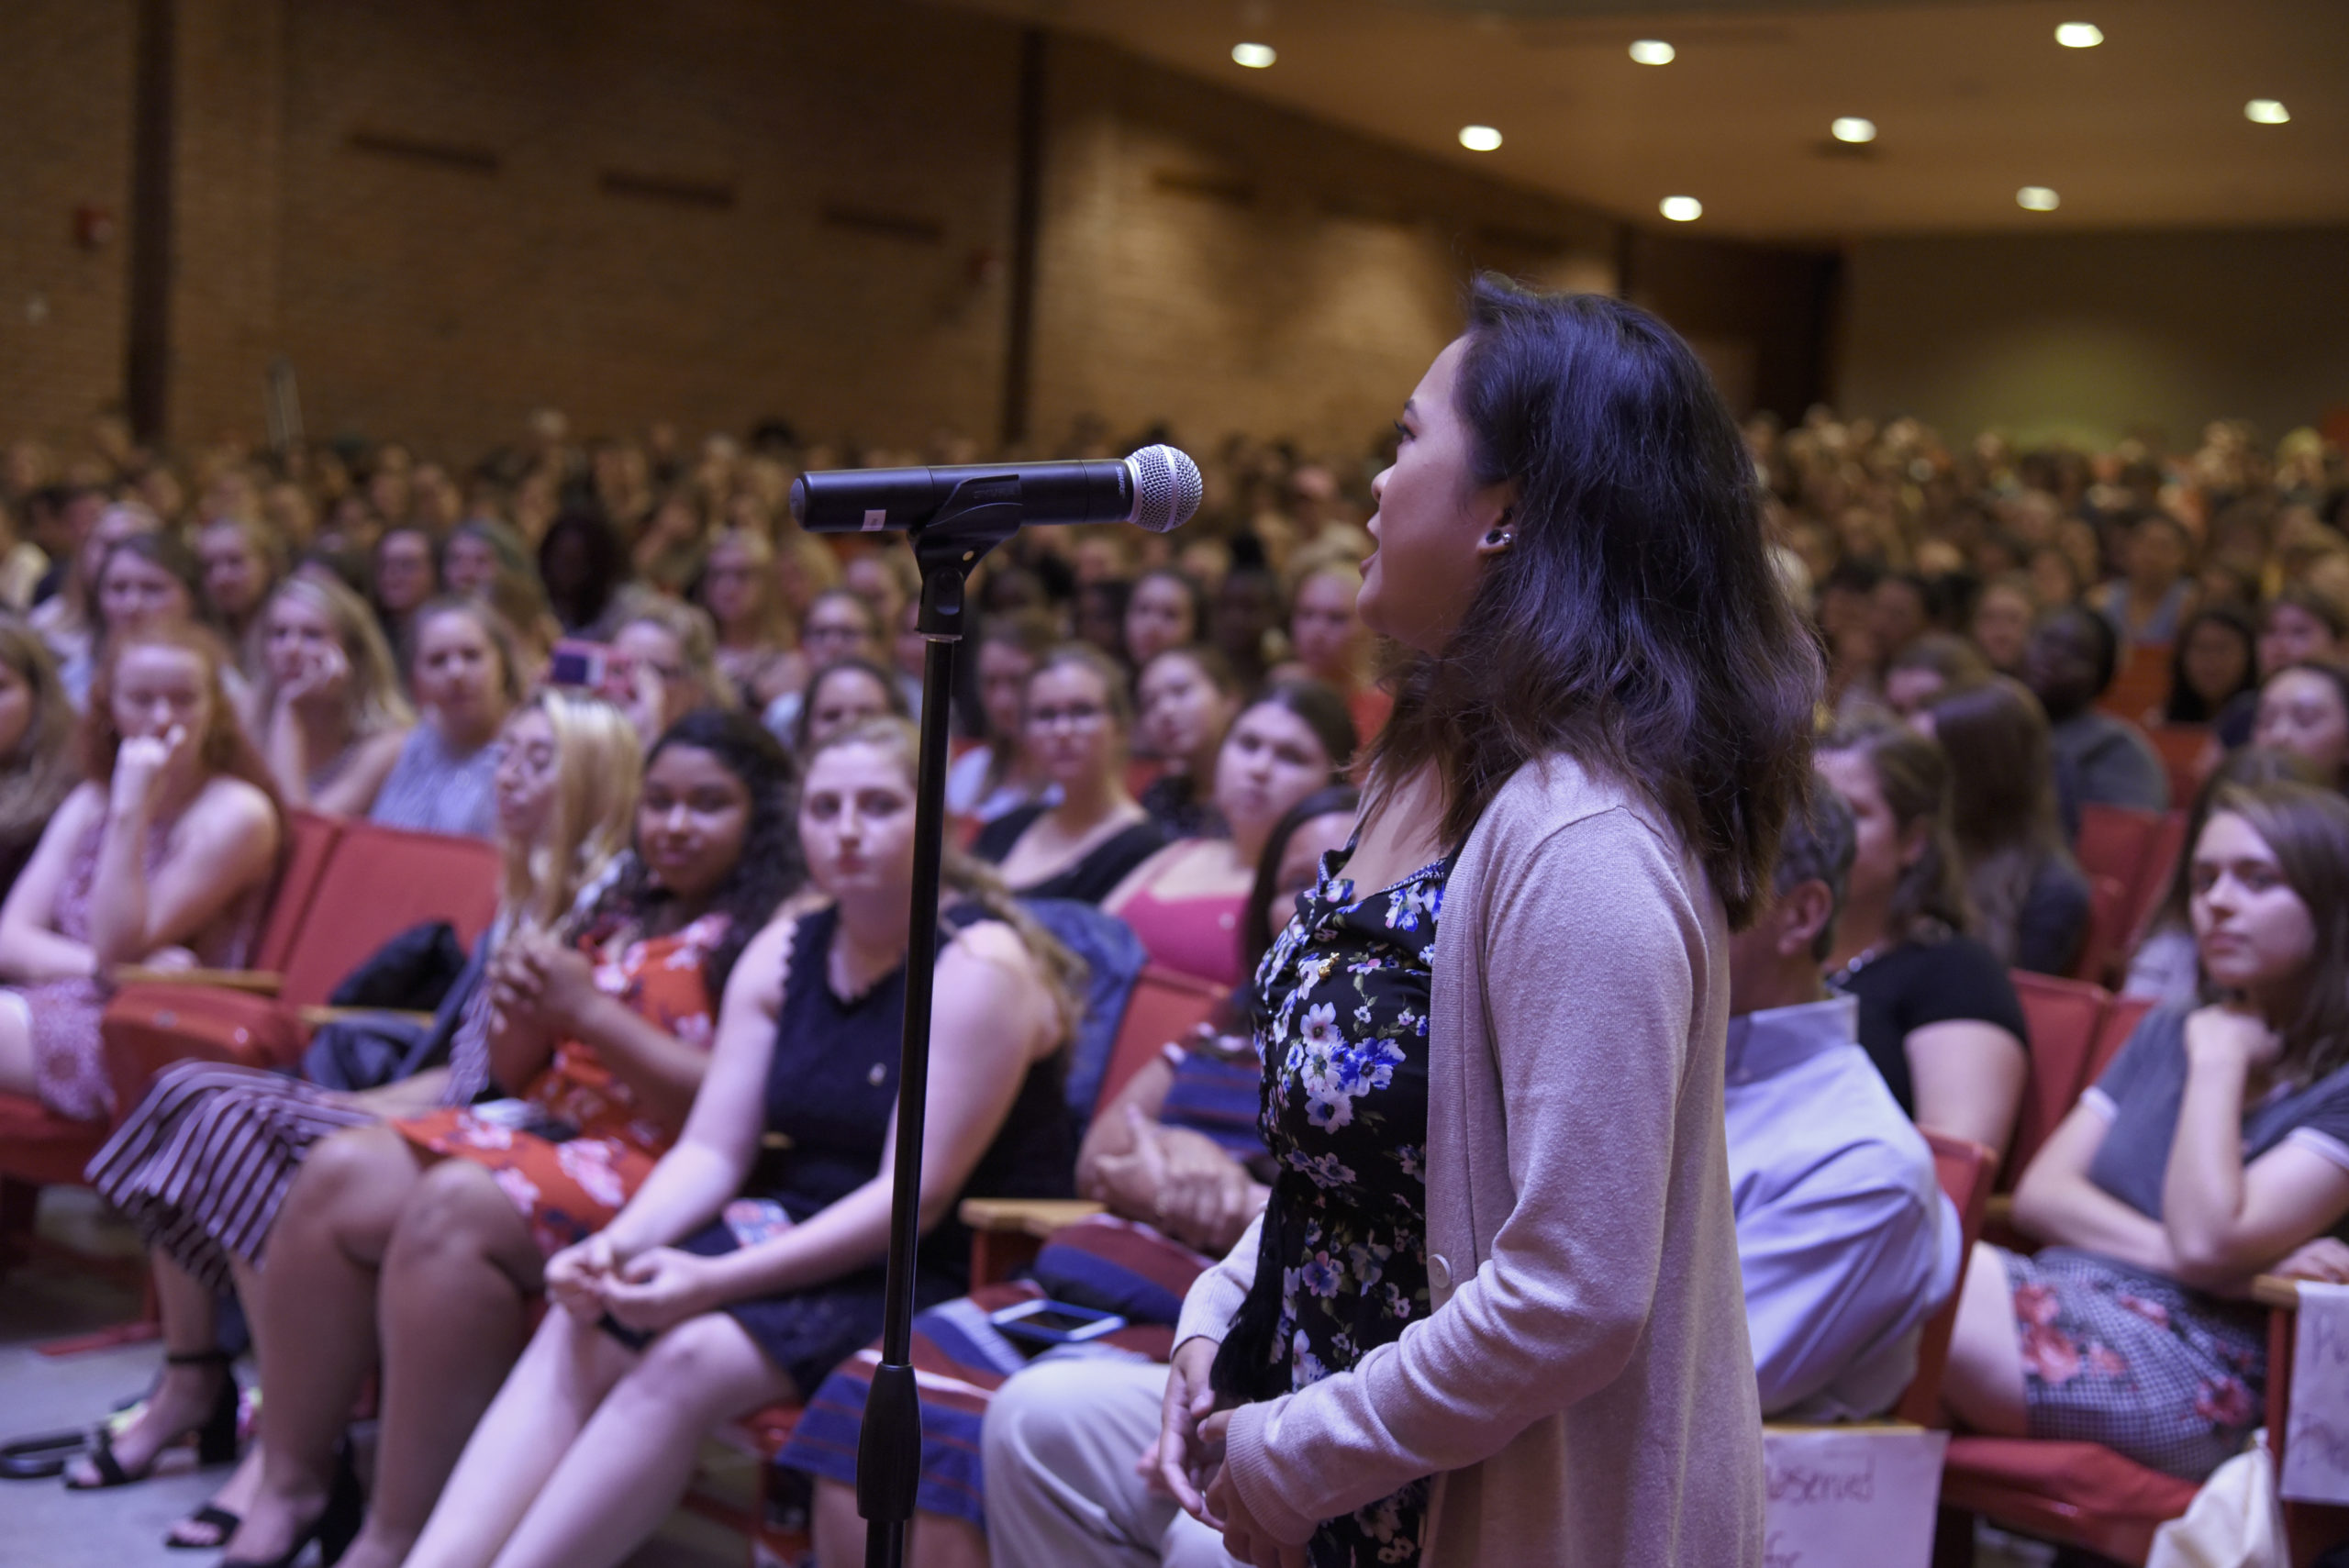 Color photograph of a crowded lecture hall with a person standing up and asking talking into a mic on a mic stand.